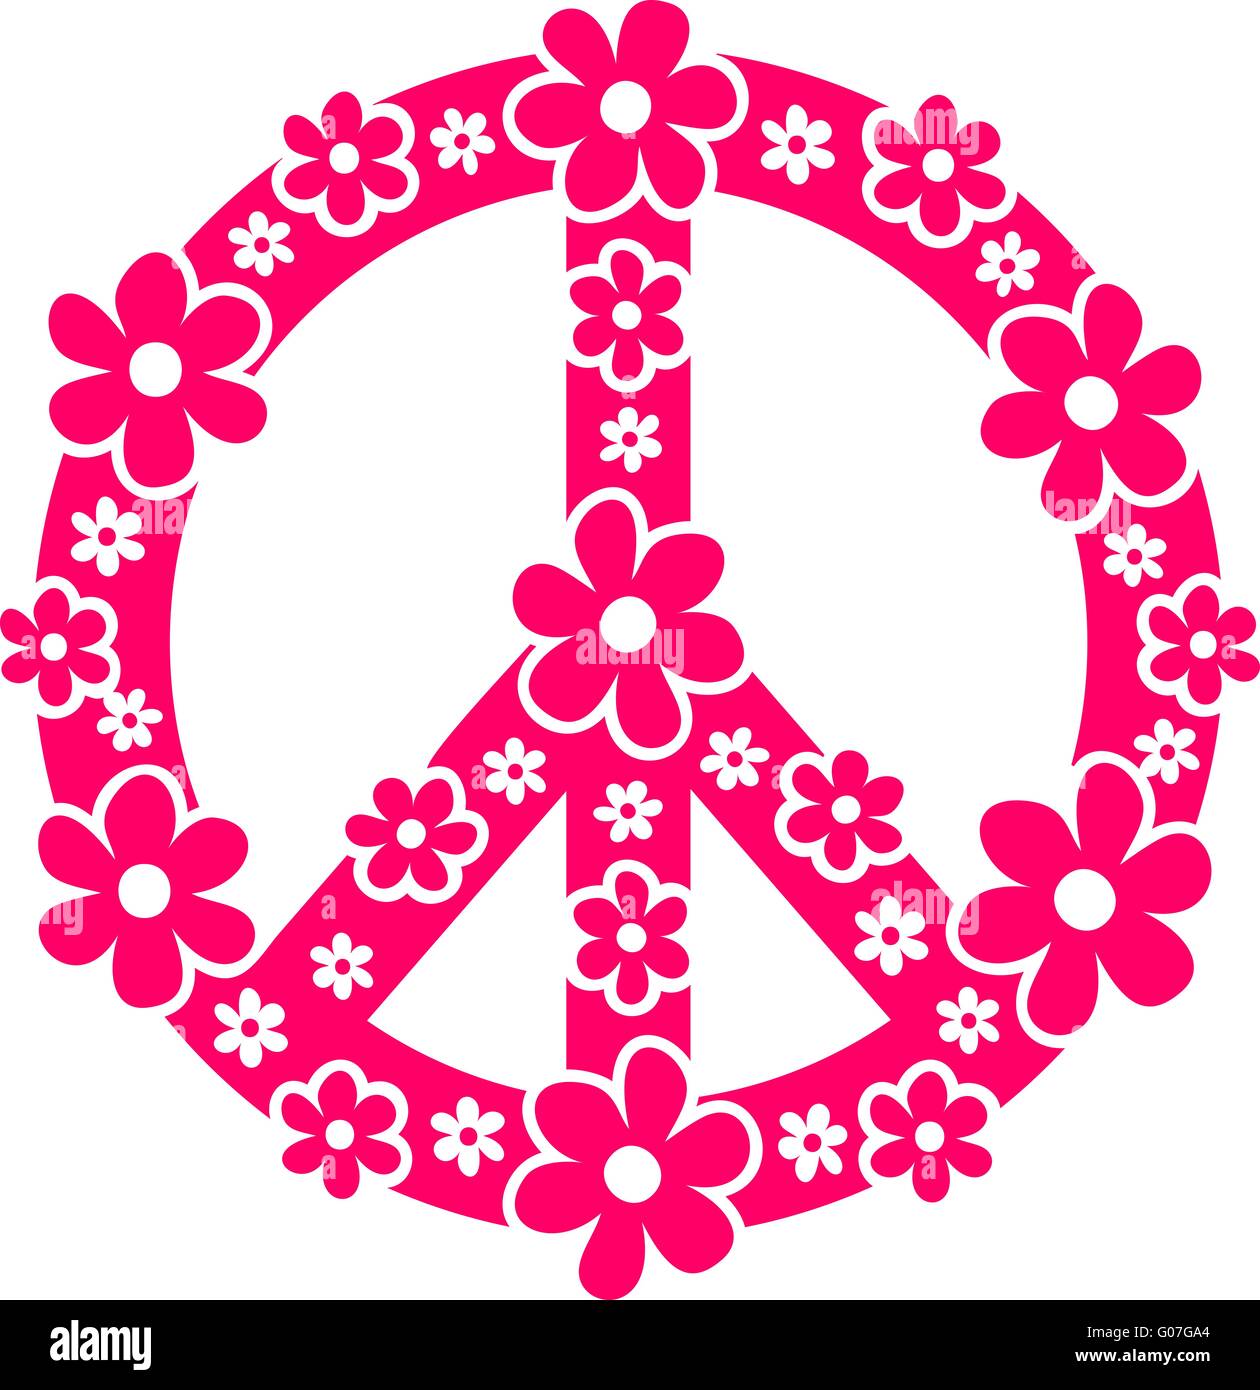 Peace sign - flower power Stock Photo